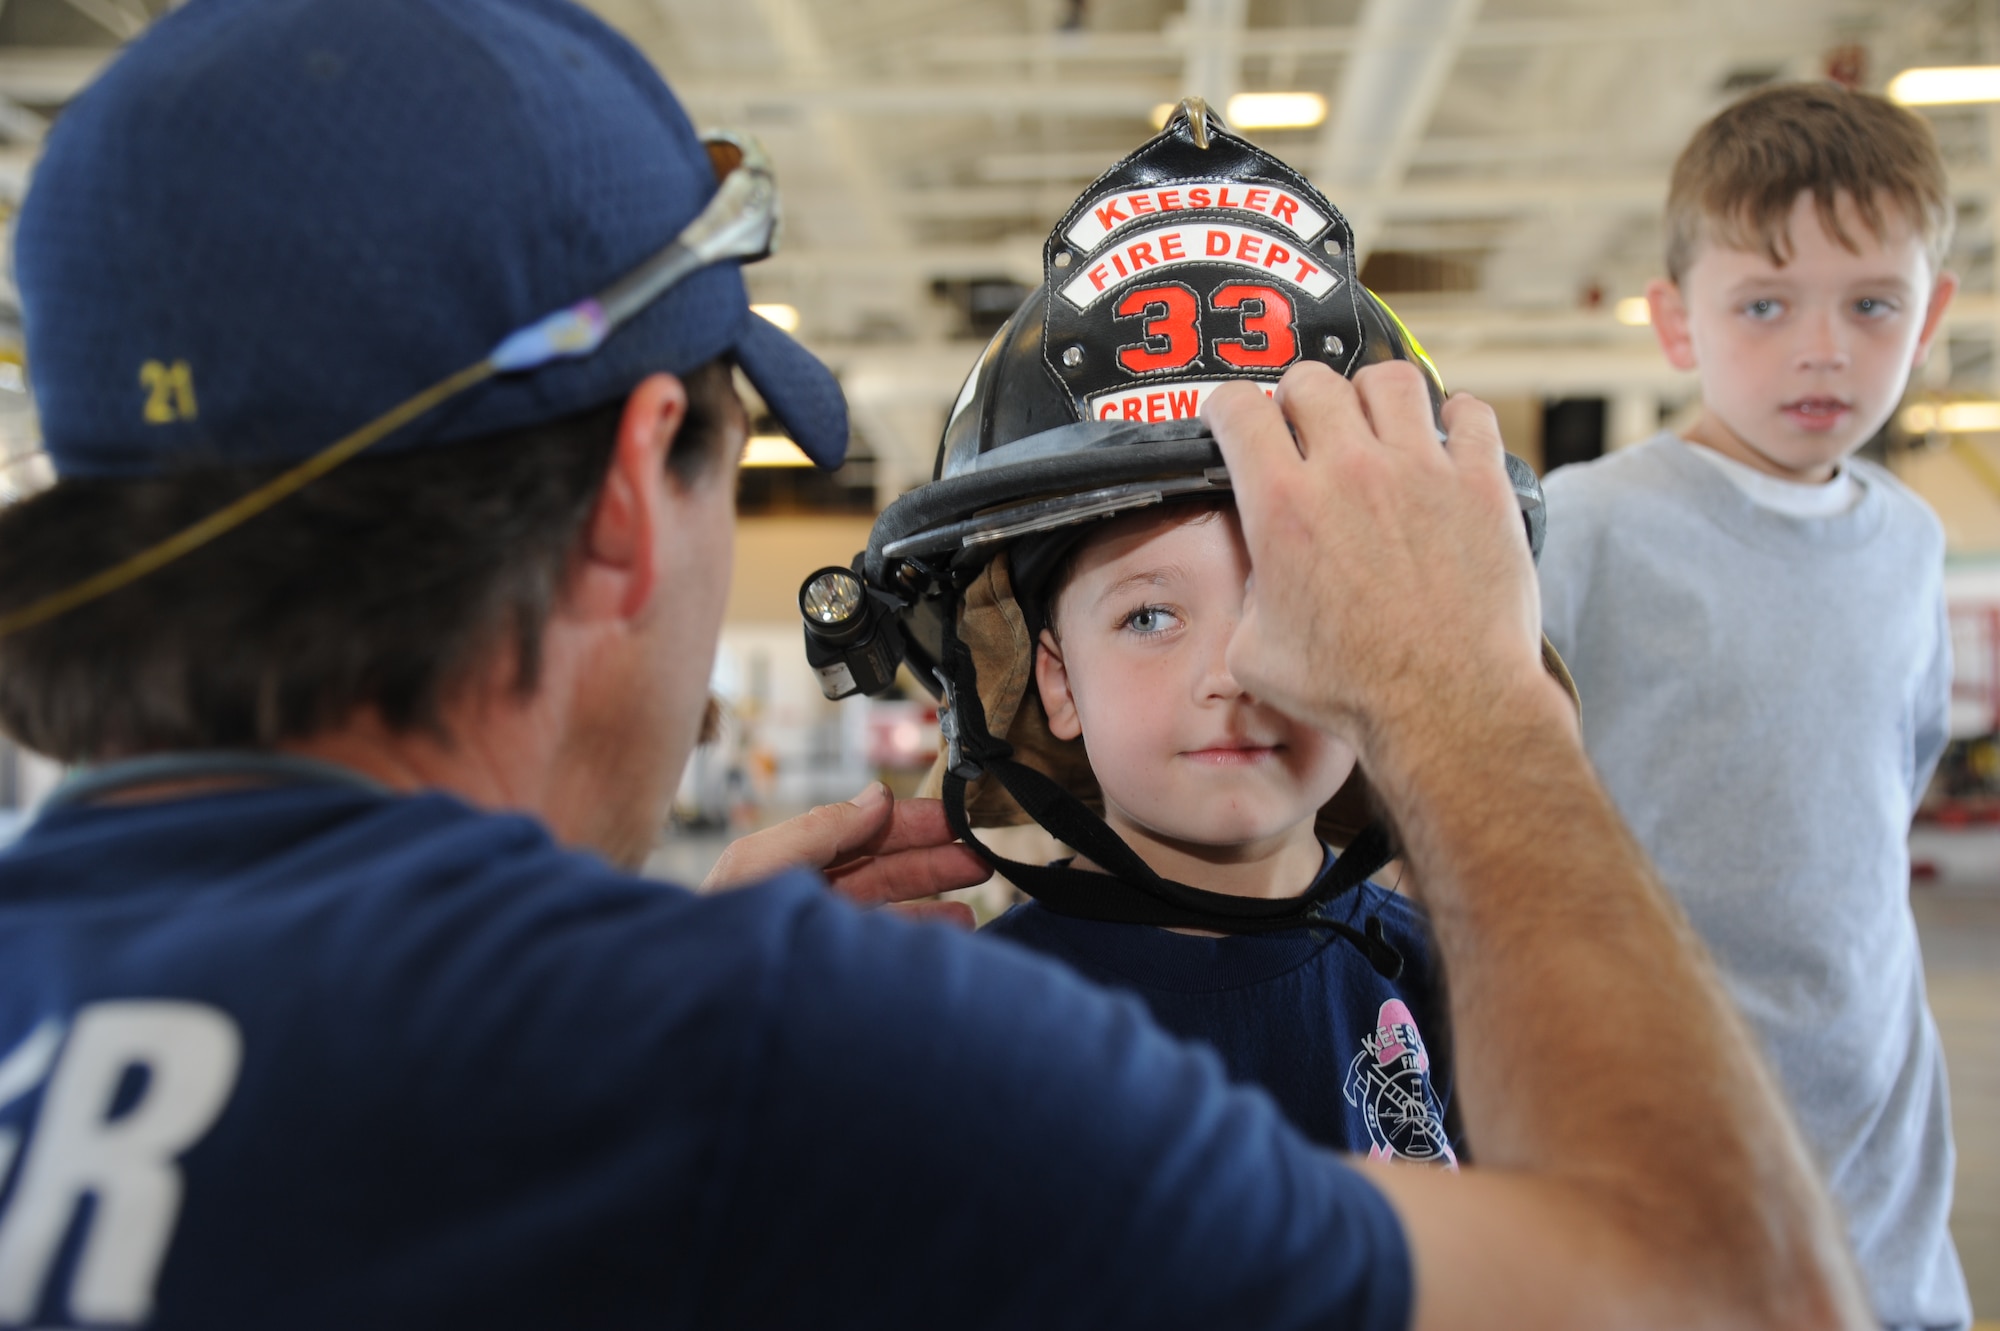 David Cleland, Keesler firefighter, secures a firefighter helmet on Alex Bullard, 4, as his brother, Kaleb, 8, watches during the Keesler Fire Department’s open house Oct. 13, 2012, Keesler Air Force Base, Miss.  Alex and Kaleb’s parents are Master Sgts. Jerame Bullard, Keesler firefighter, and Sarah Bullard, 81st Dental Squadron. The event was held on the final day of fire prevention week during which the fire department conducted random fire drills throughout the base, toured various facilities with Sparky the Fire Dog, passed out fire safety handouts and fire hats for children and provided stove and fire extinguisher demonstrations.  (U.S. Air Force photo by Kemberly Groue)